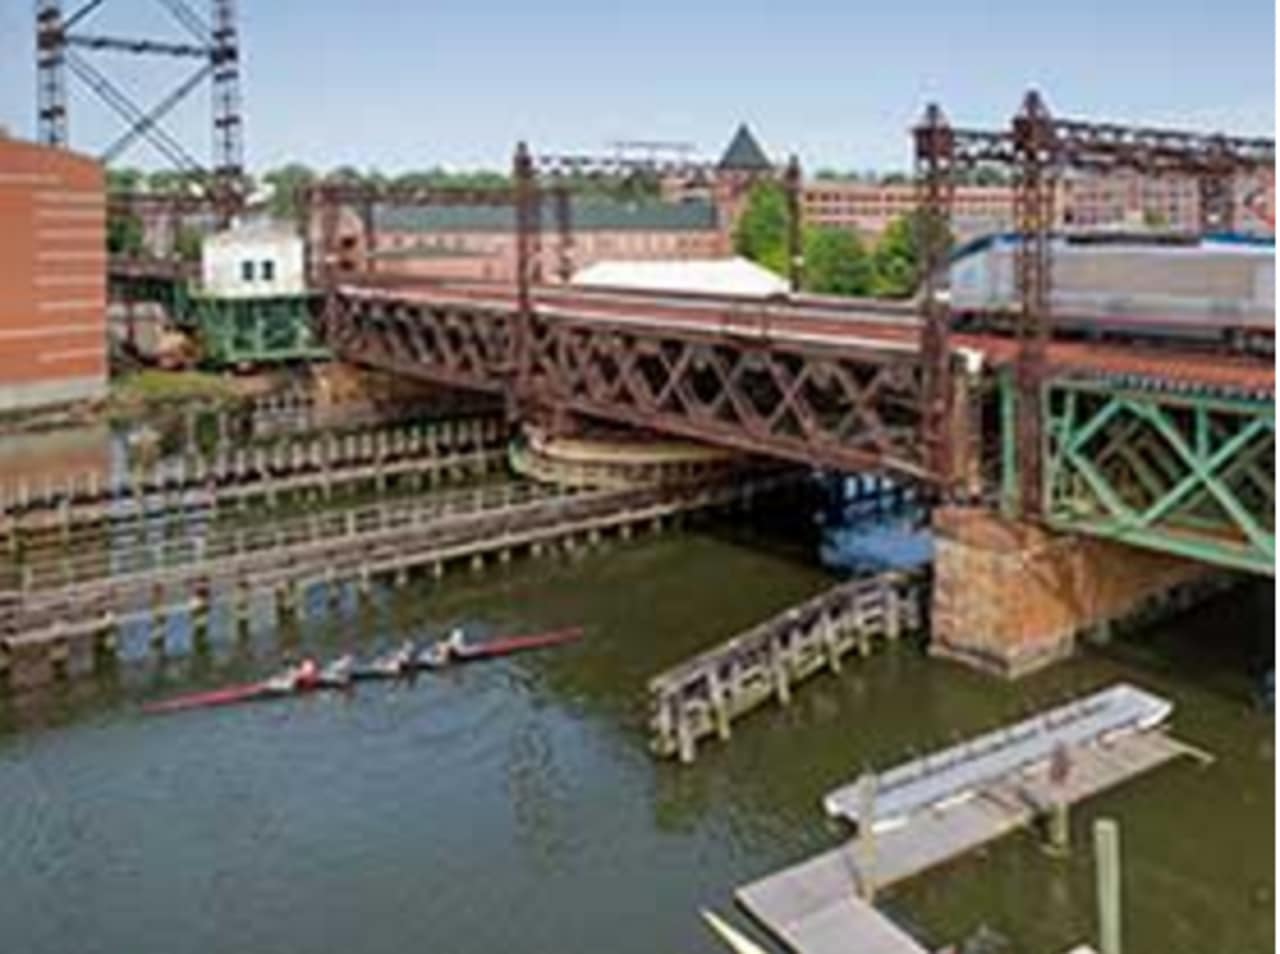 The Walk bridge carries Metro-North and Amtrak trains over the Norwalk River at the mouth of the Norwalk Harbor. It swings open to allow marine traffic to pass through.